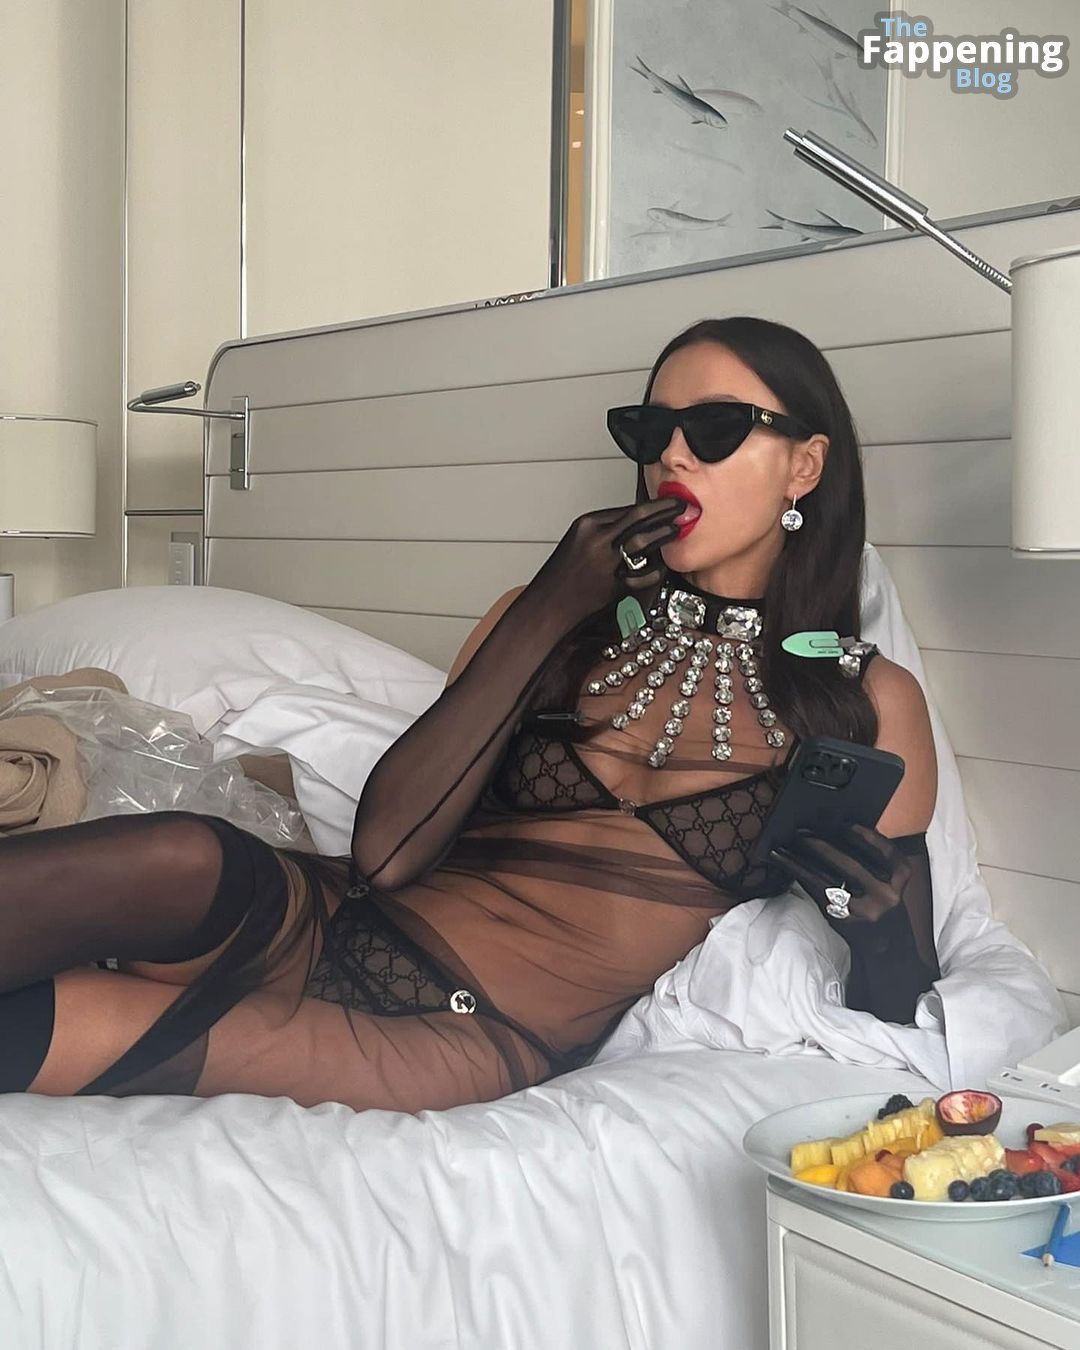 Irina Shayk Displays Her Sexy Figure in a Hot Outfit in Cannes (8 New Photos)